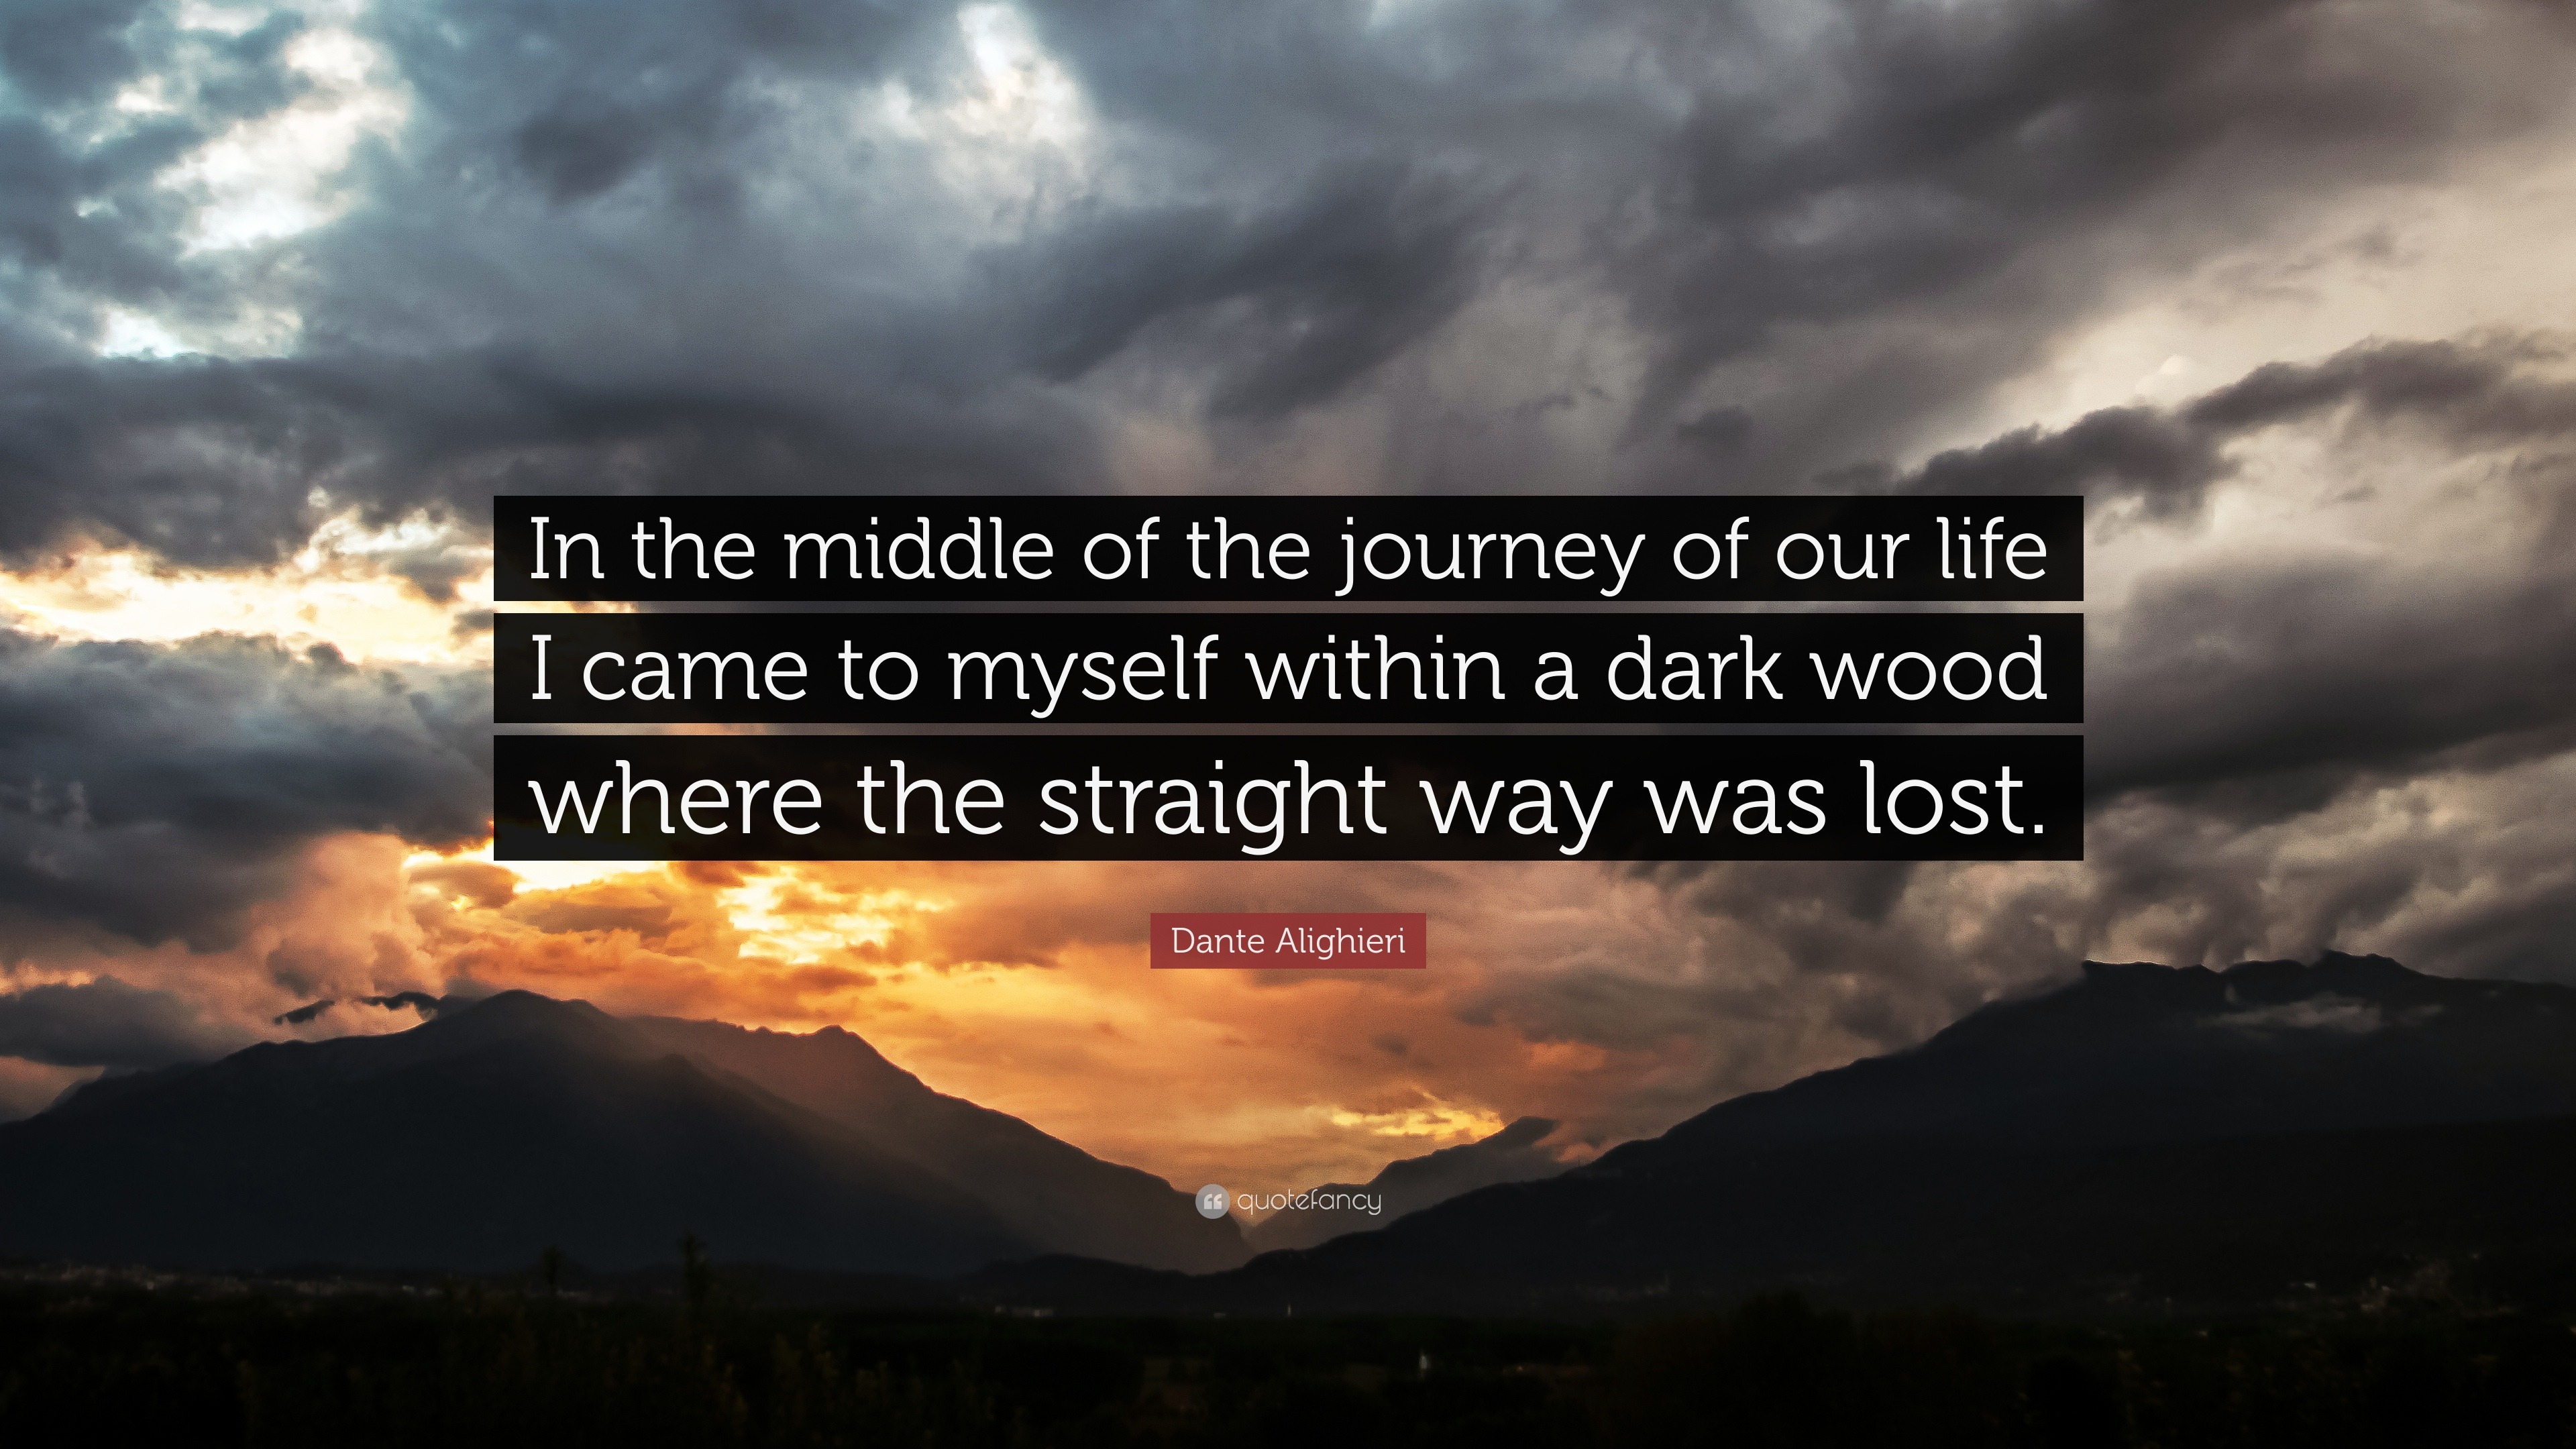 Dante Alighieri Quote: “In the middle of the journey of our life I came